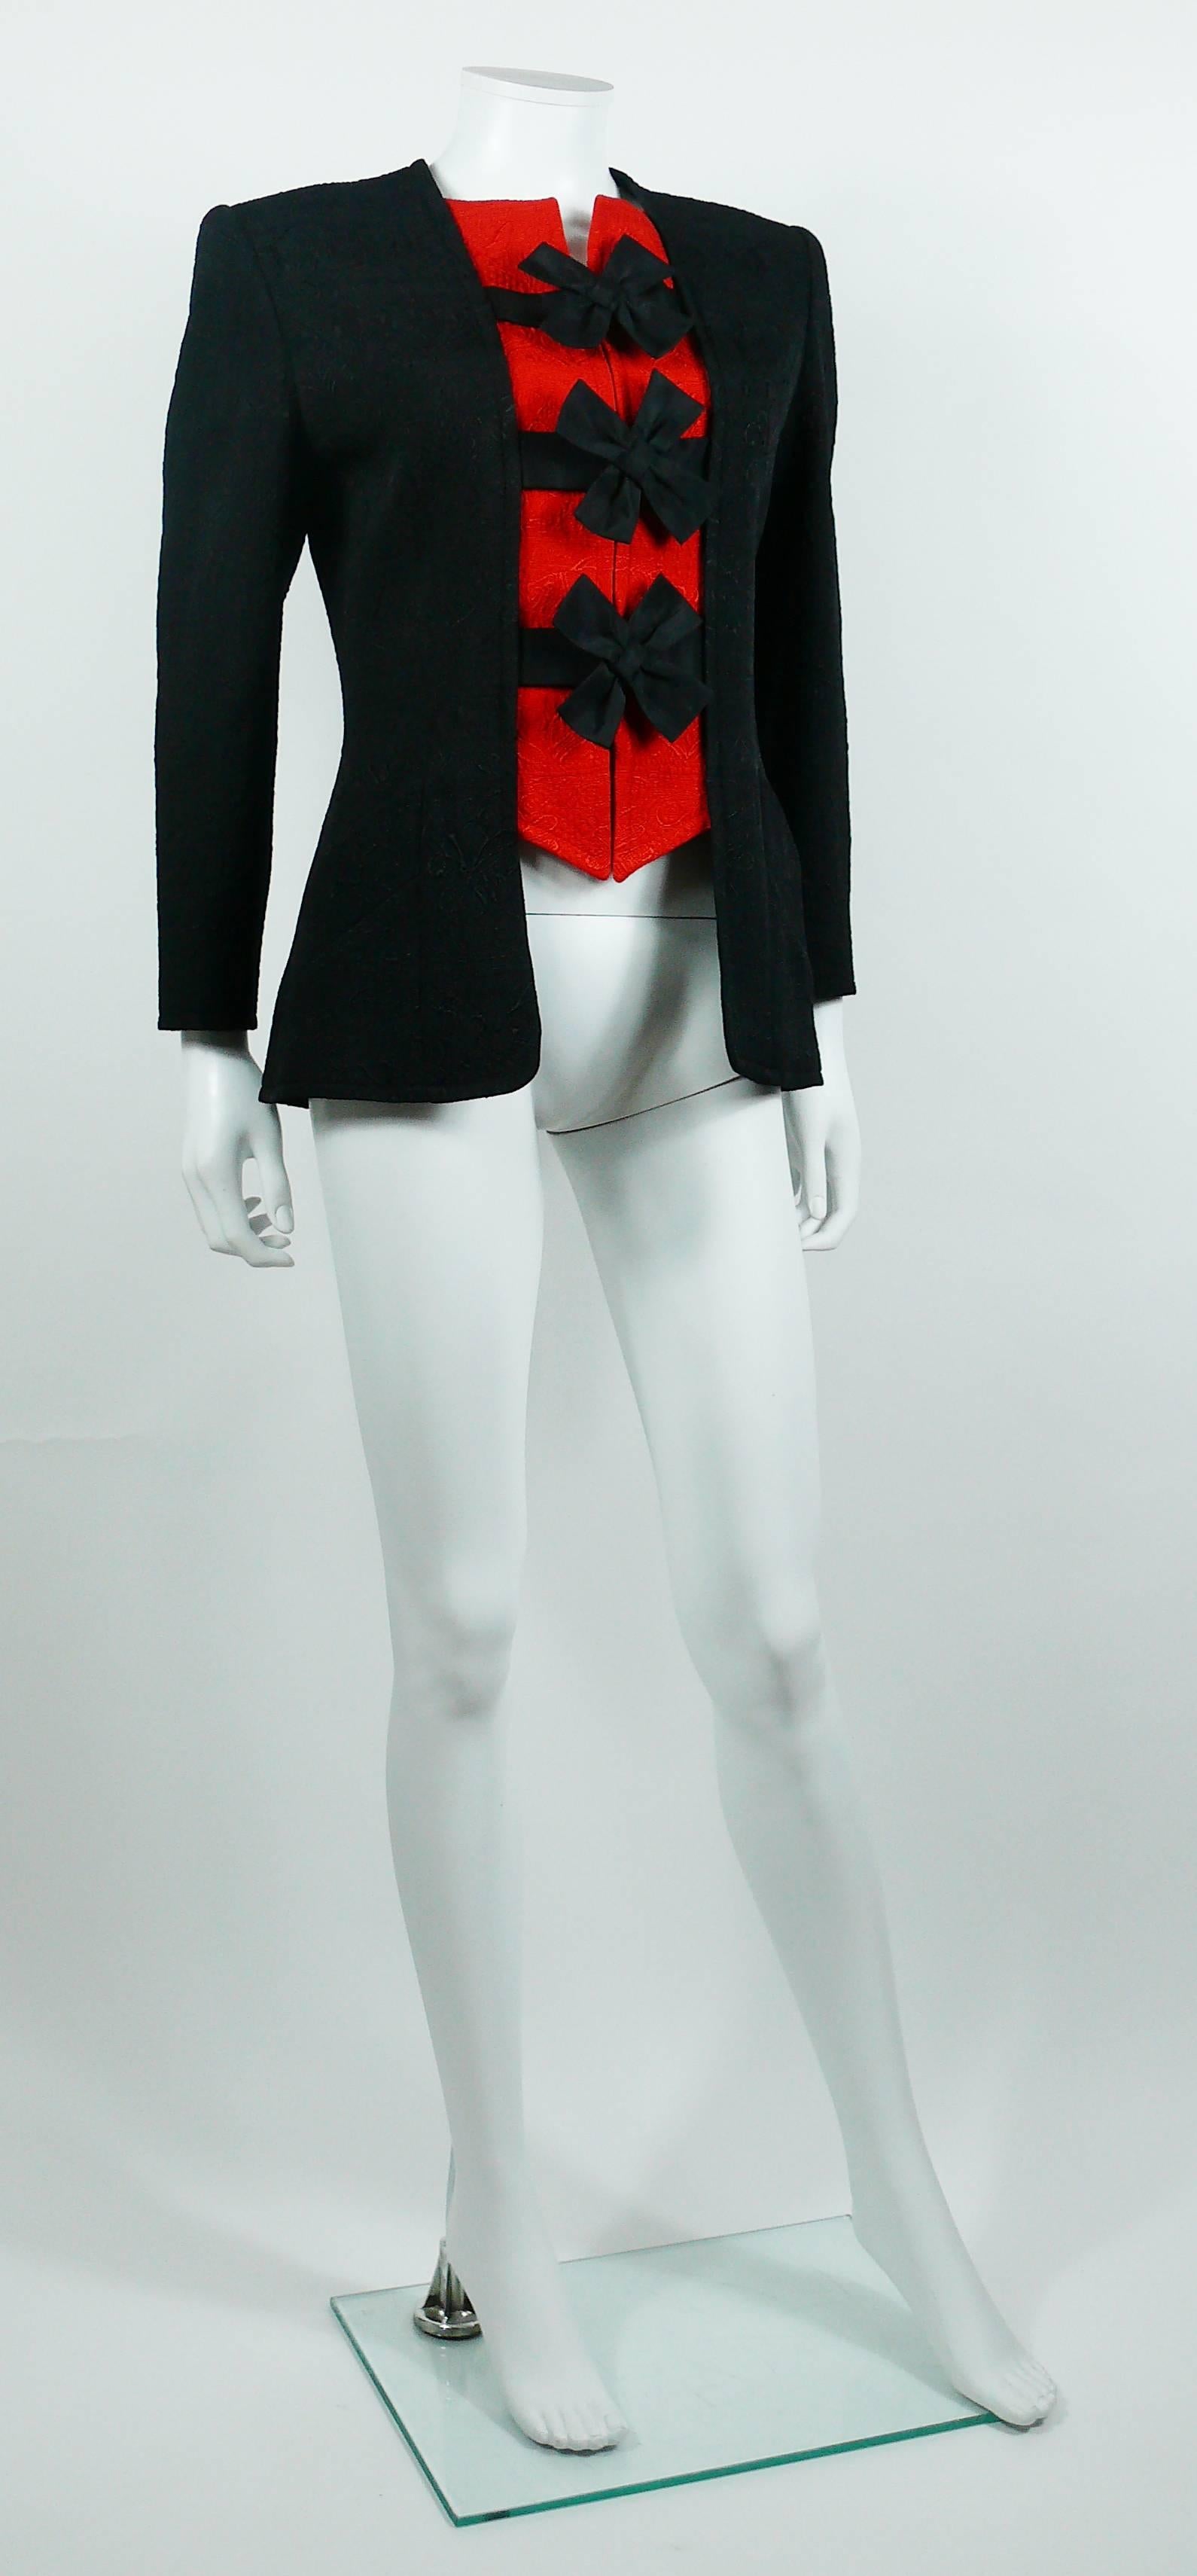 CHRISTIAN LACROIX vintage Provençal 18th Century inspired black and red jacket.

This jacket features :
- Provençal quilts inspired black and red textile.
- 3 black ribbons on front.
- Long sleeves.
- Padded shoulders.
- 2 front pockets.
- Zipper